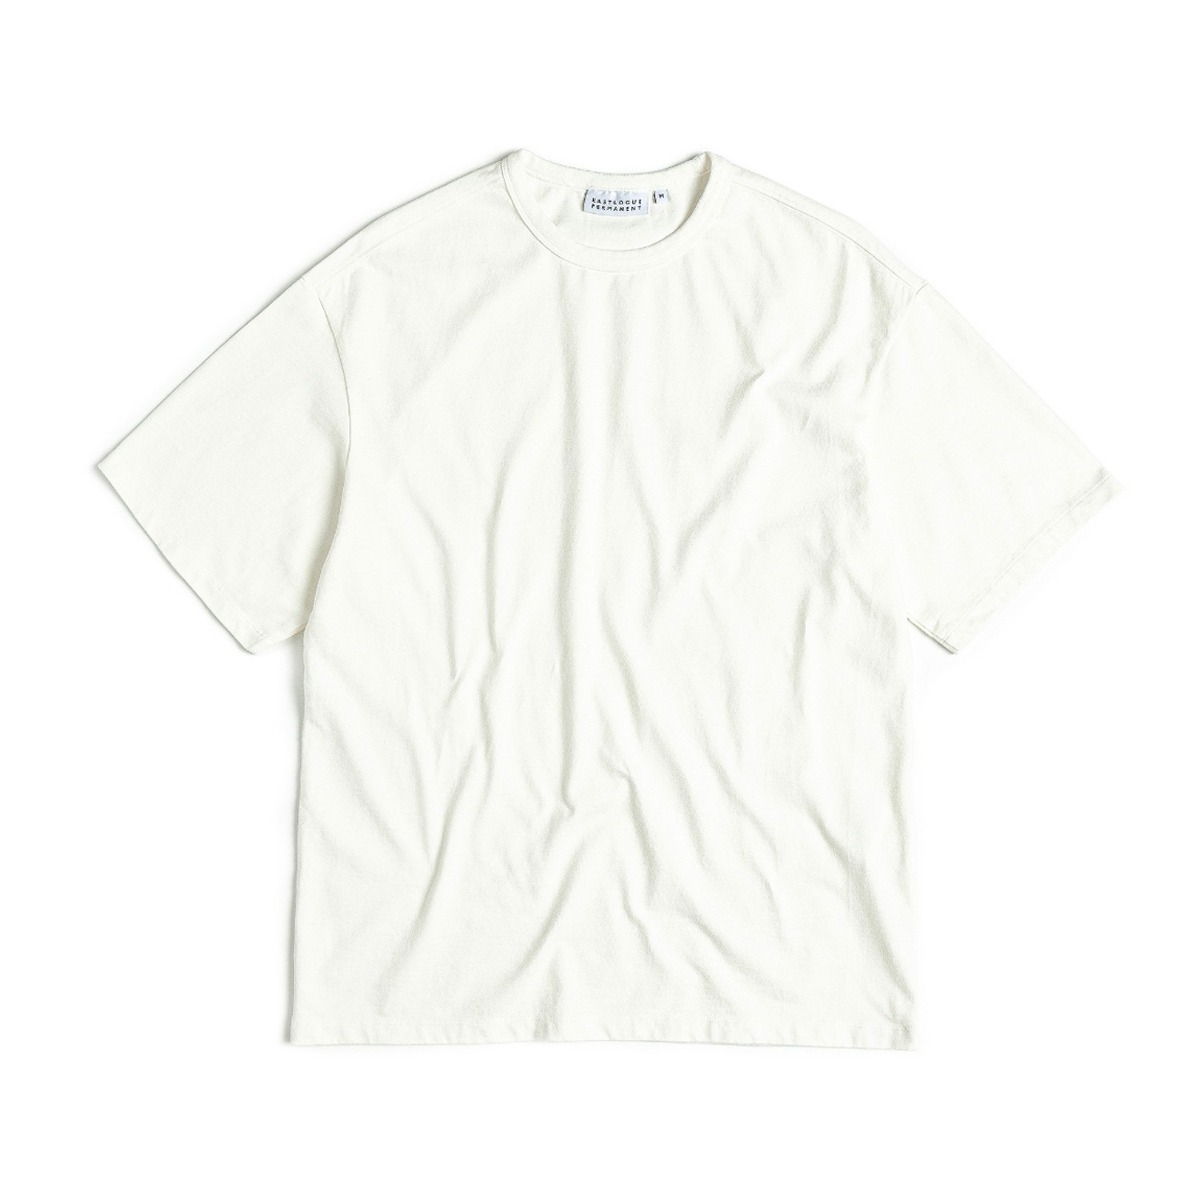 [EASTLOGUE PERMANENT] LOOSE FIT T-SHIRT &#039;OFF WHITE&#039;